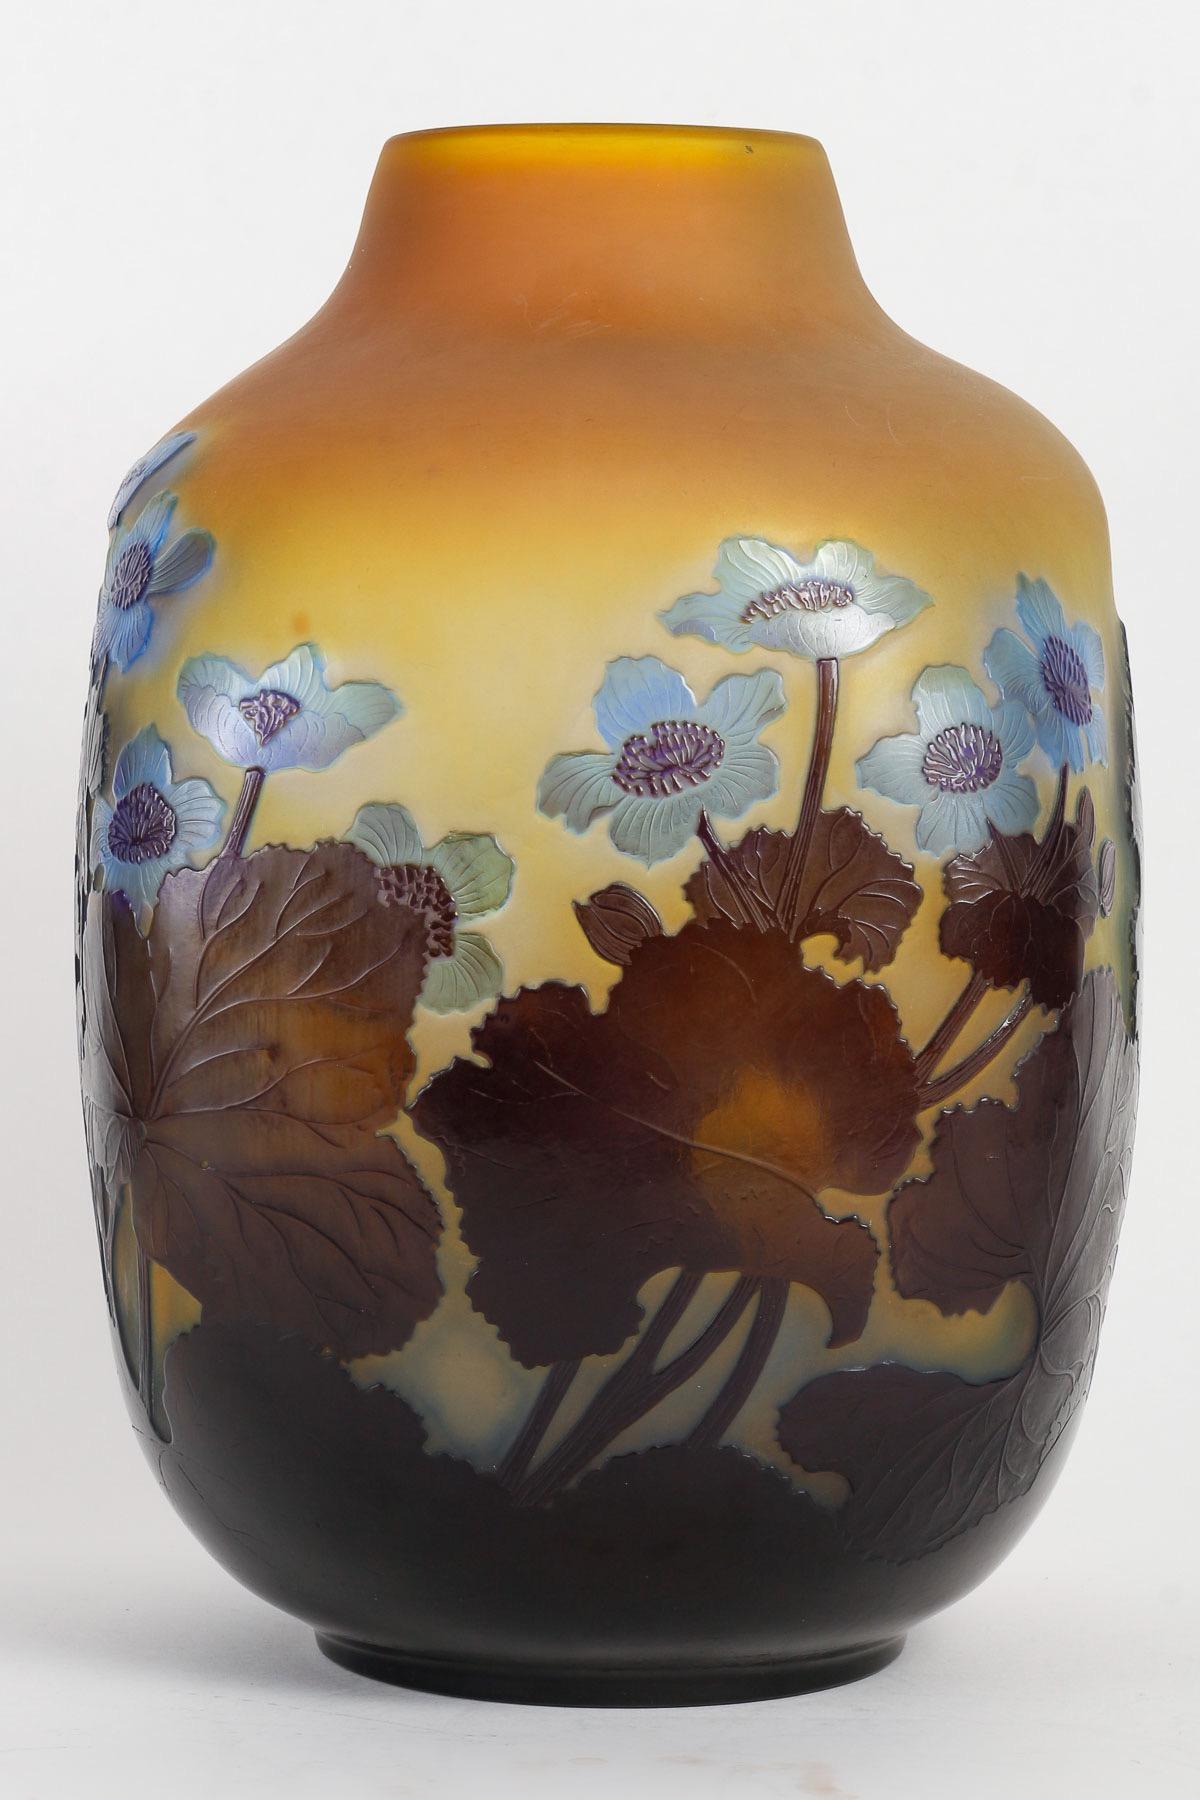 Émile Gallé (1846-1904)
French Art Nouveau Caméo Glass Vase « Anemones » circa 1900

Rare Galle French cameo glass vase in dark blue over yellow 
Blue Anemones flowers design 
Signed in cameo Gallé

Émile Gallé was born in Nancy on 4 May 1846, the